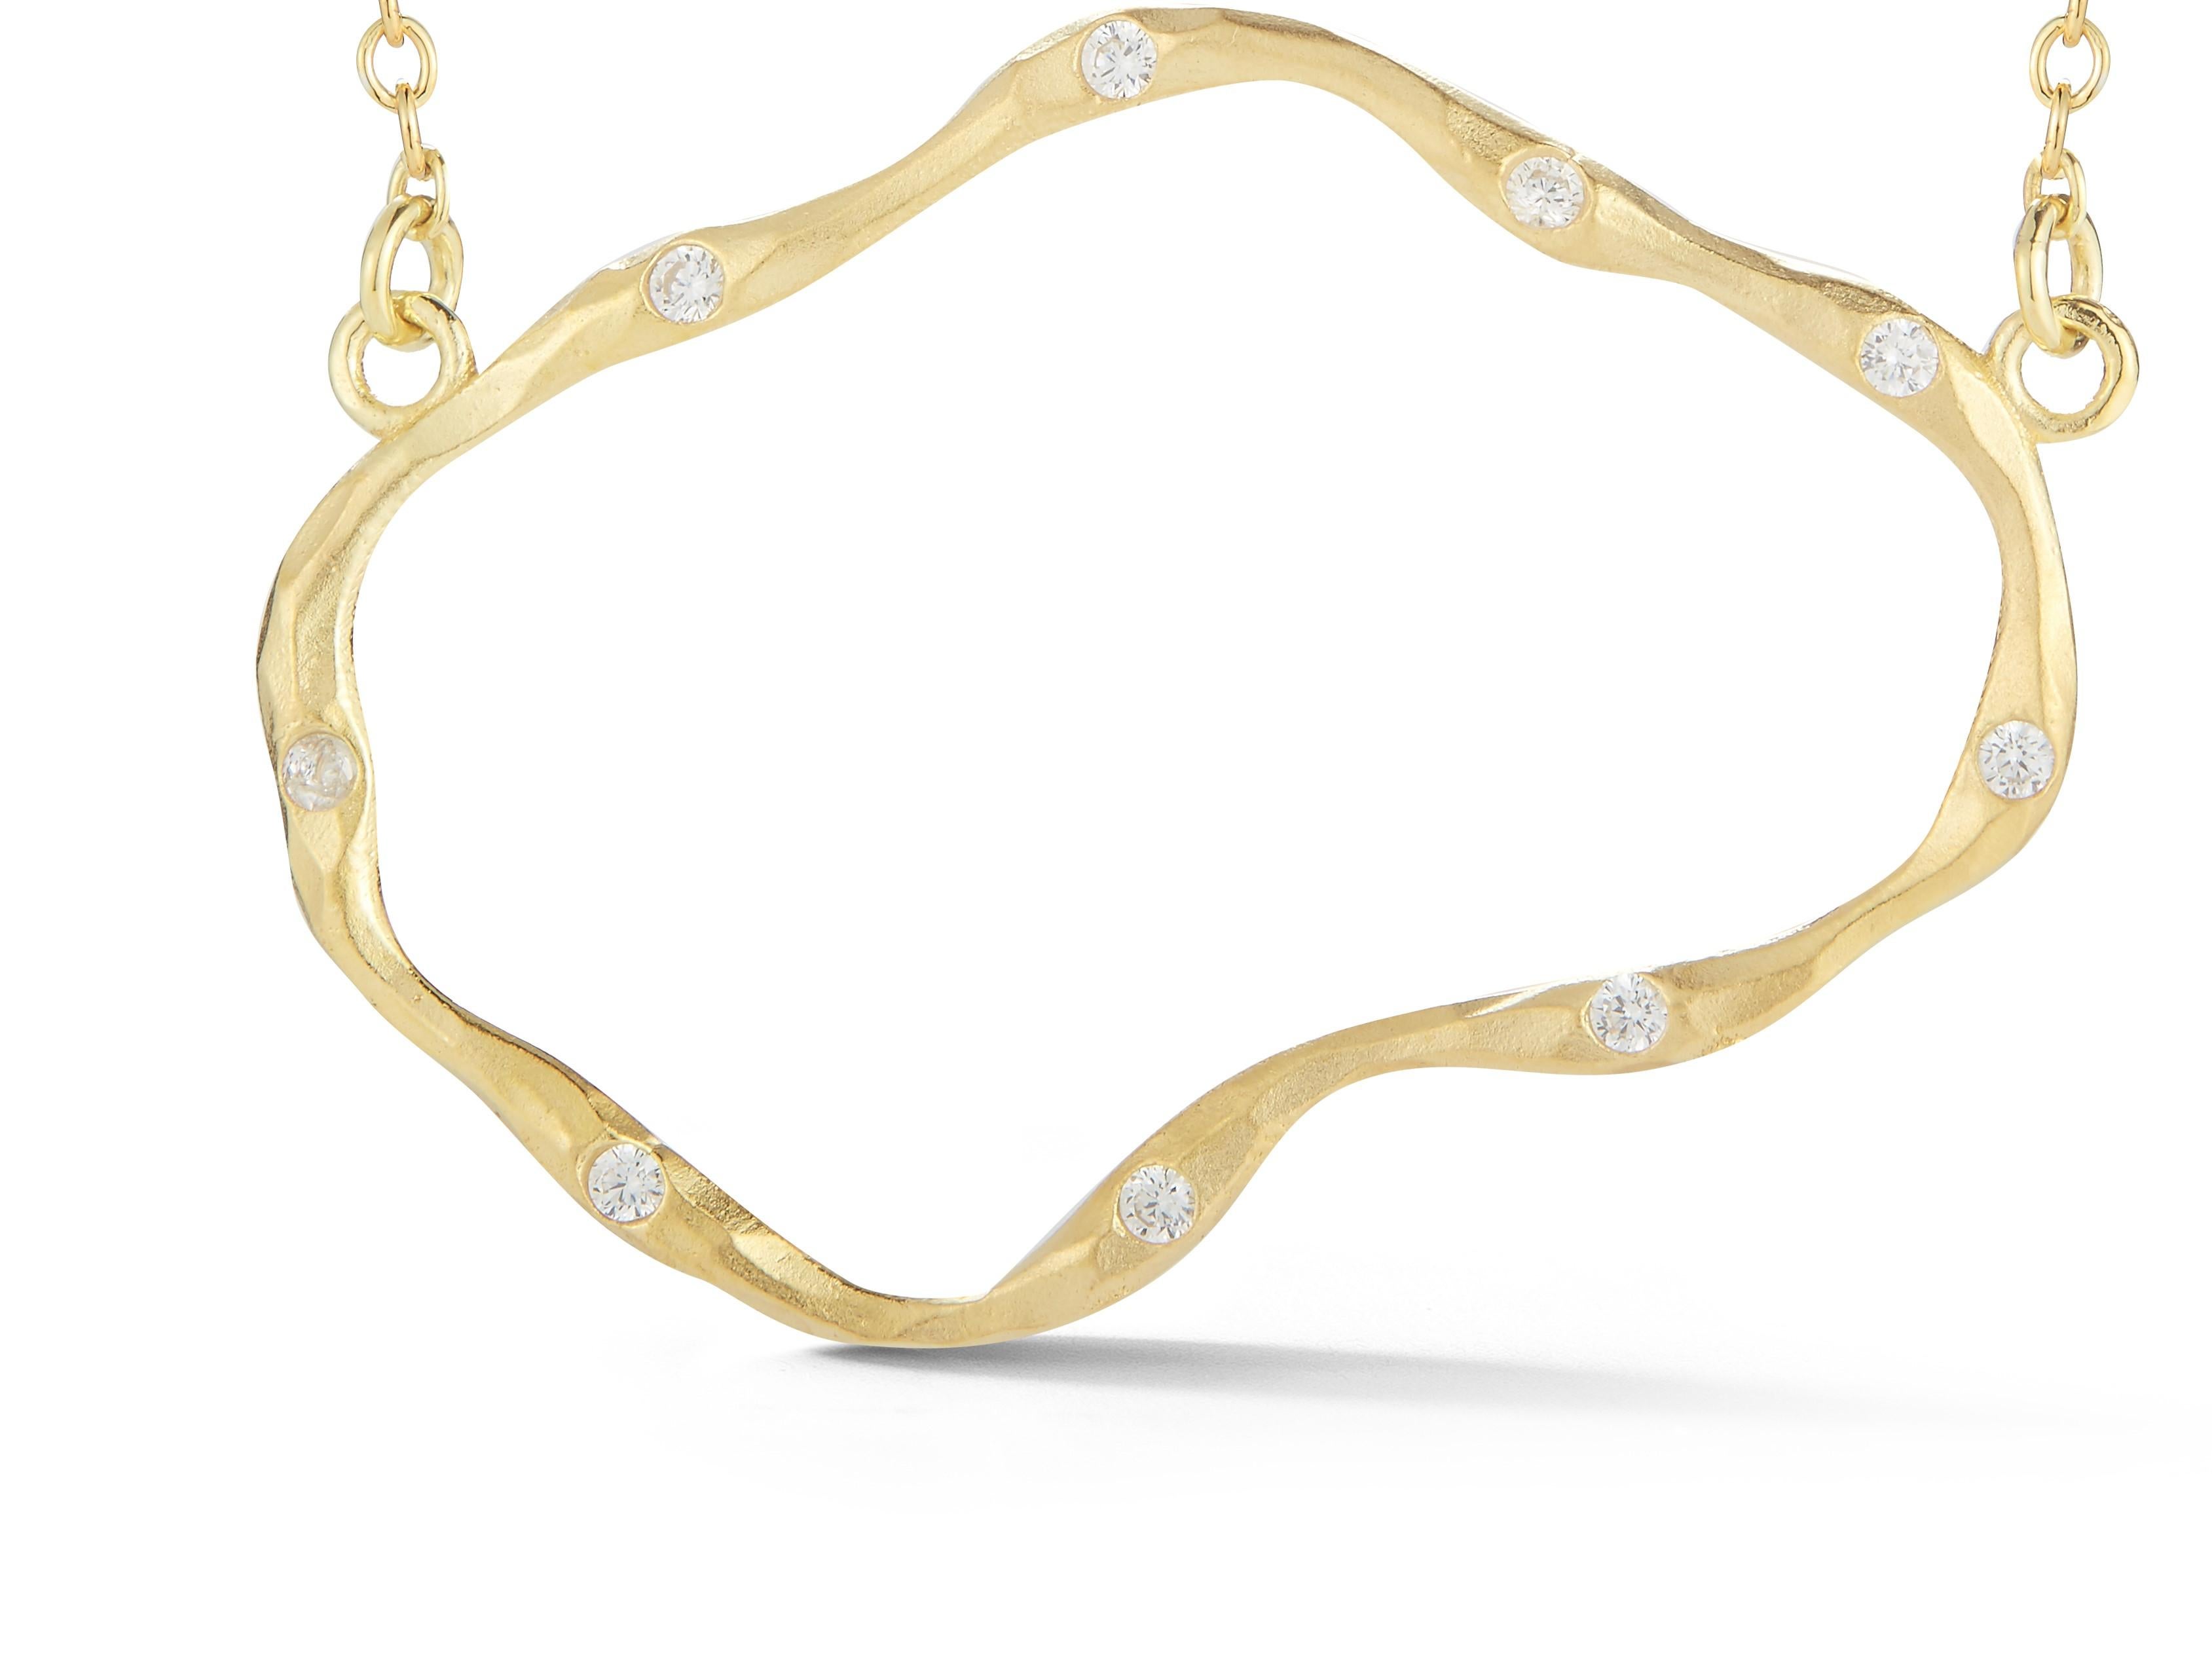 14 Karat Yellow Gold Hand-Crafted Matte and Hammer-Finished East-to-West Open Free-Form Necklace, Set on a 16